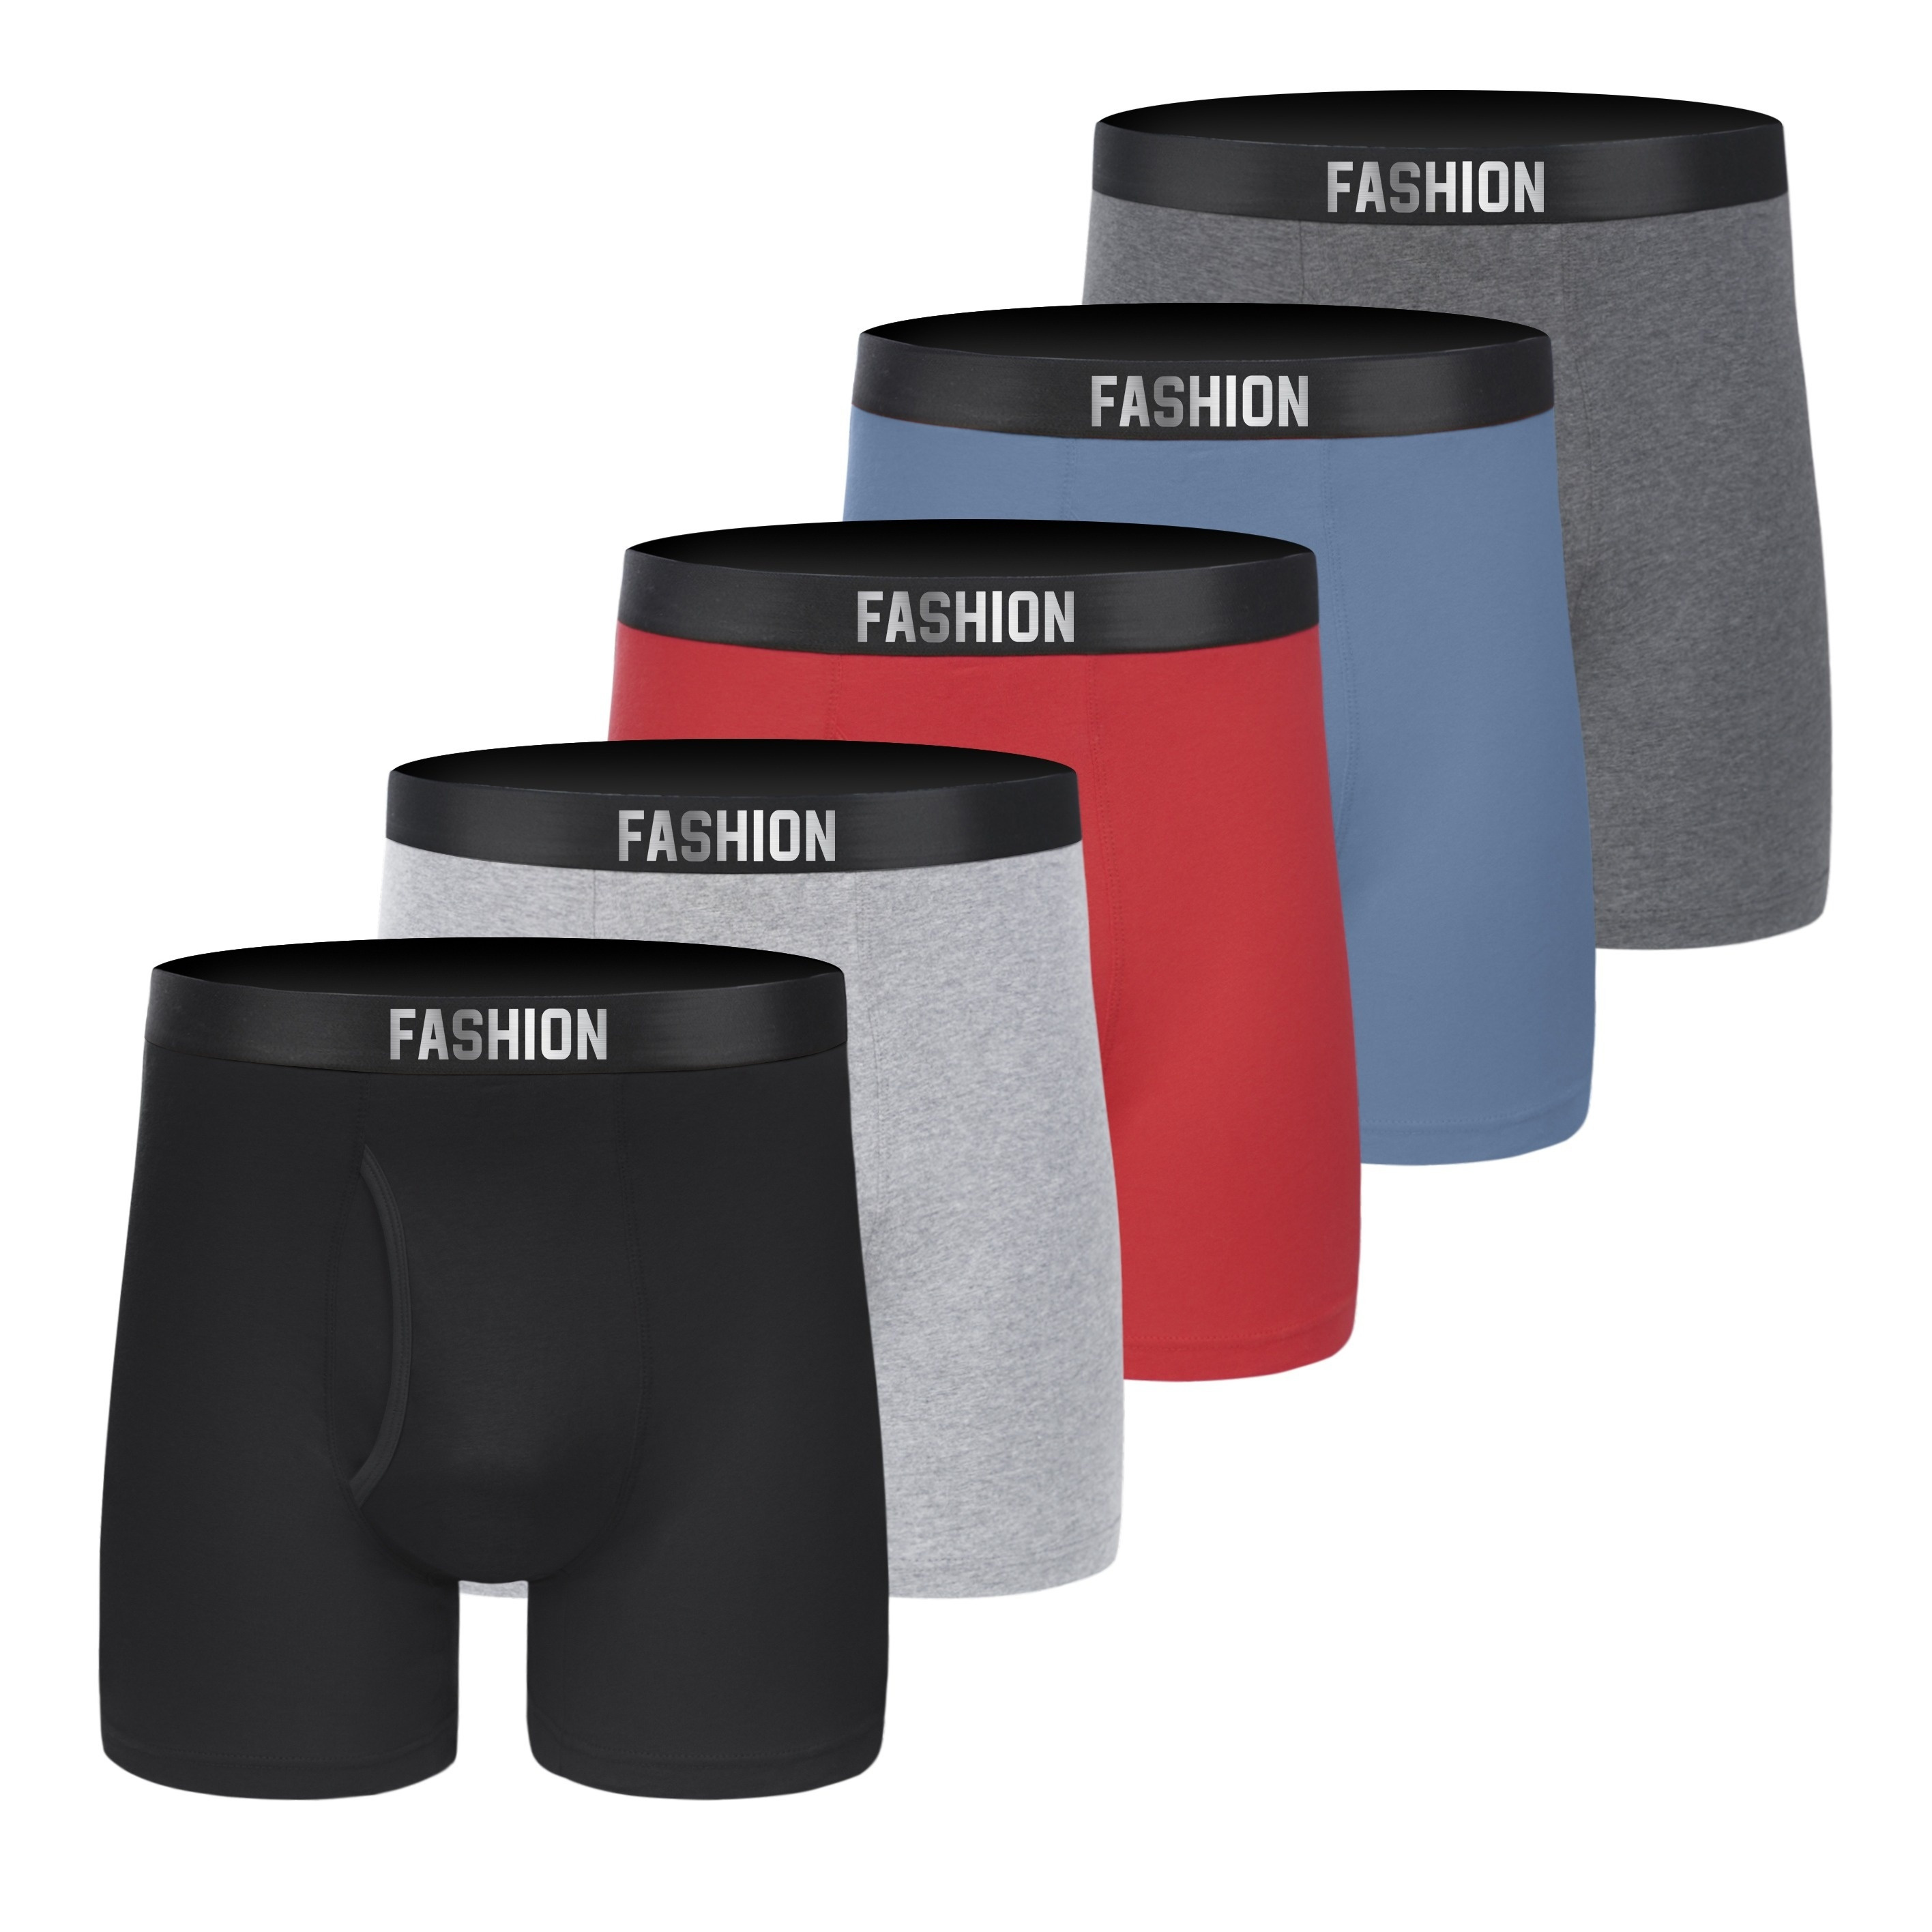 

5pcs Solid Color Print Men's Cotton Long Style Boxer Briefs With Half Open Fly, Comfortable Underwear High Elastic Waistband Sports Trunks Soft & Breathable Underpants For Daily Wear & Sleep